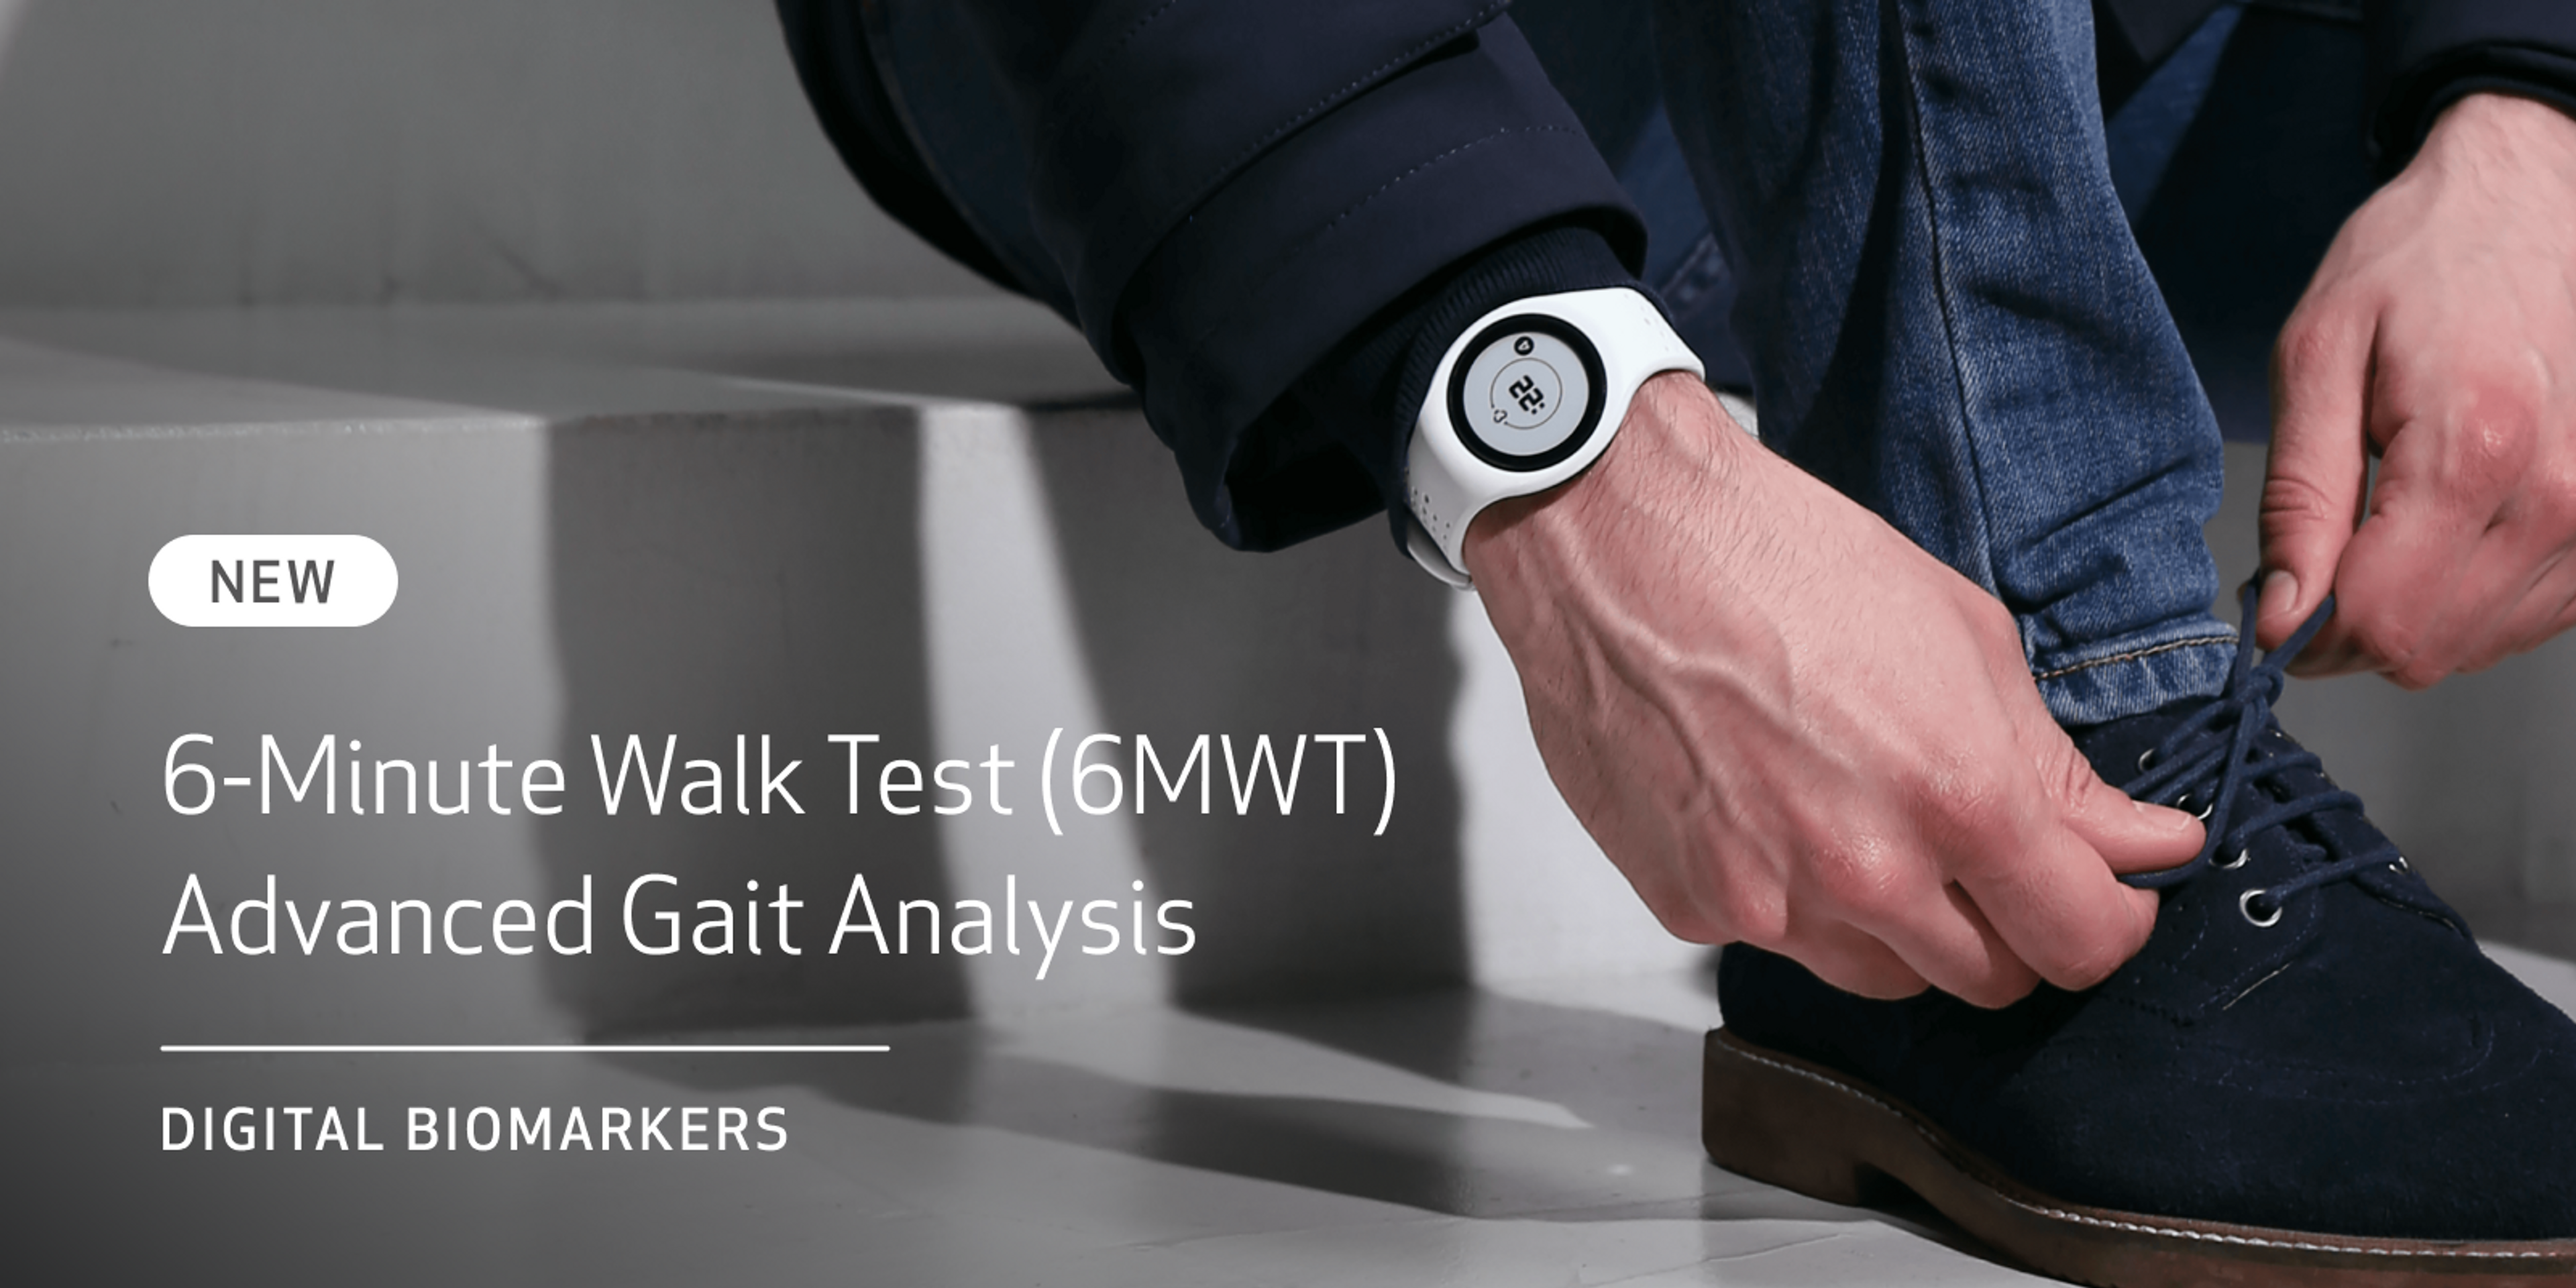 Introducing 6MWT and advanced gait analysis to Empatica's actigraphy suite